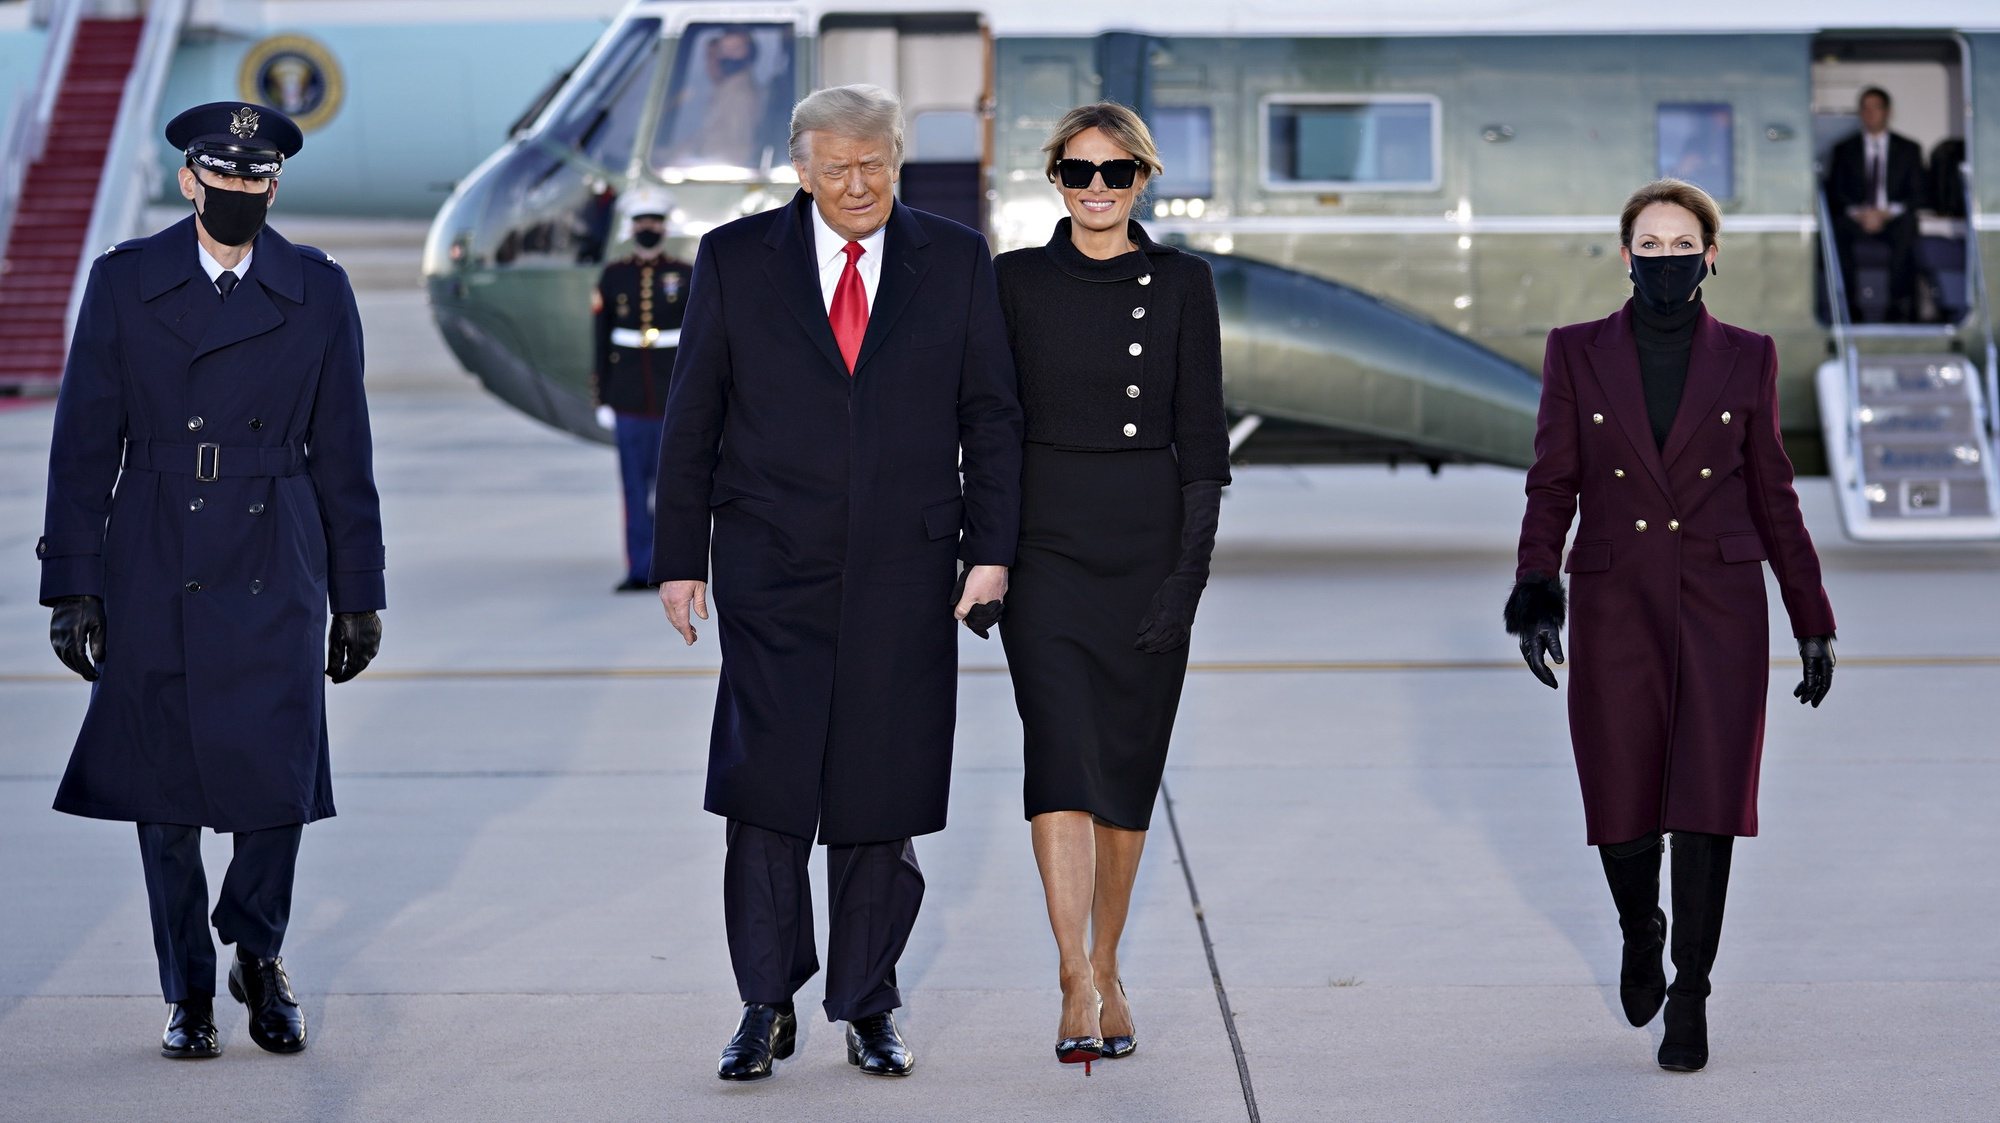 epa08951546 U.S. President Donald Trump (C-L) and U.S. First Lady Melania Trump arrive to a farewell ceremony at Joint Base Andrews, Maryland, before the inauguration of Joe Biden as US President in Washington, DC, USA, 20 January 2021. Biden won the 03 November 2020 election to become the 46th President of the United States of America.  EPA/STEFANI REYNOLDS/ POOL